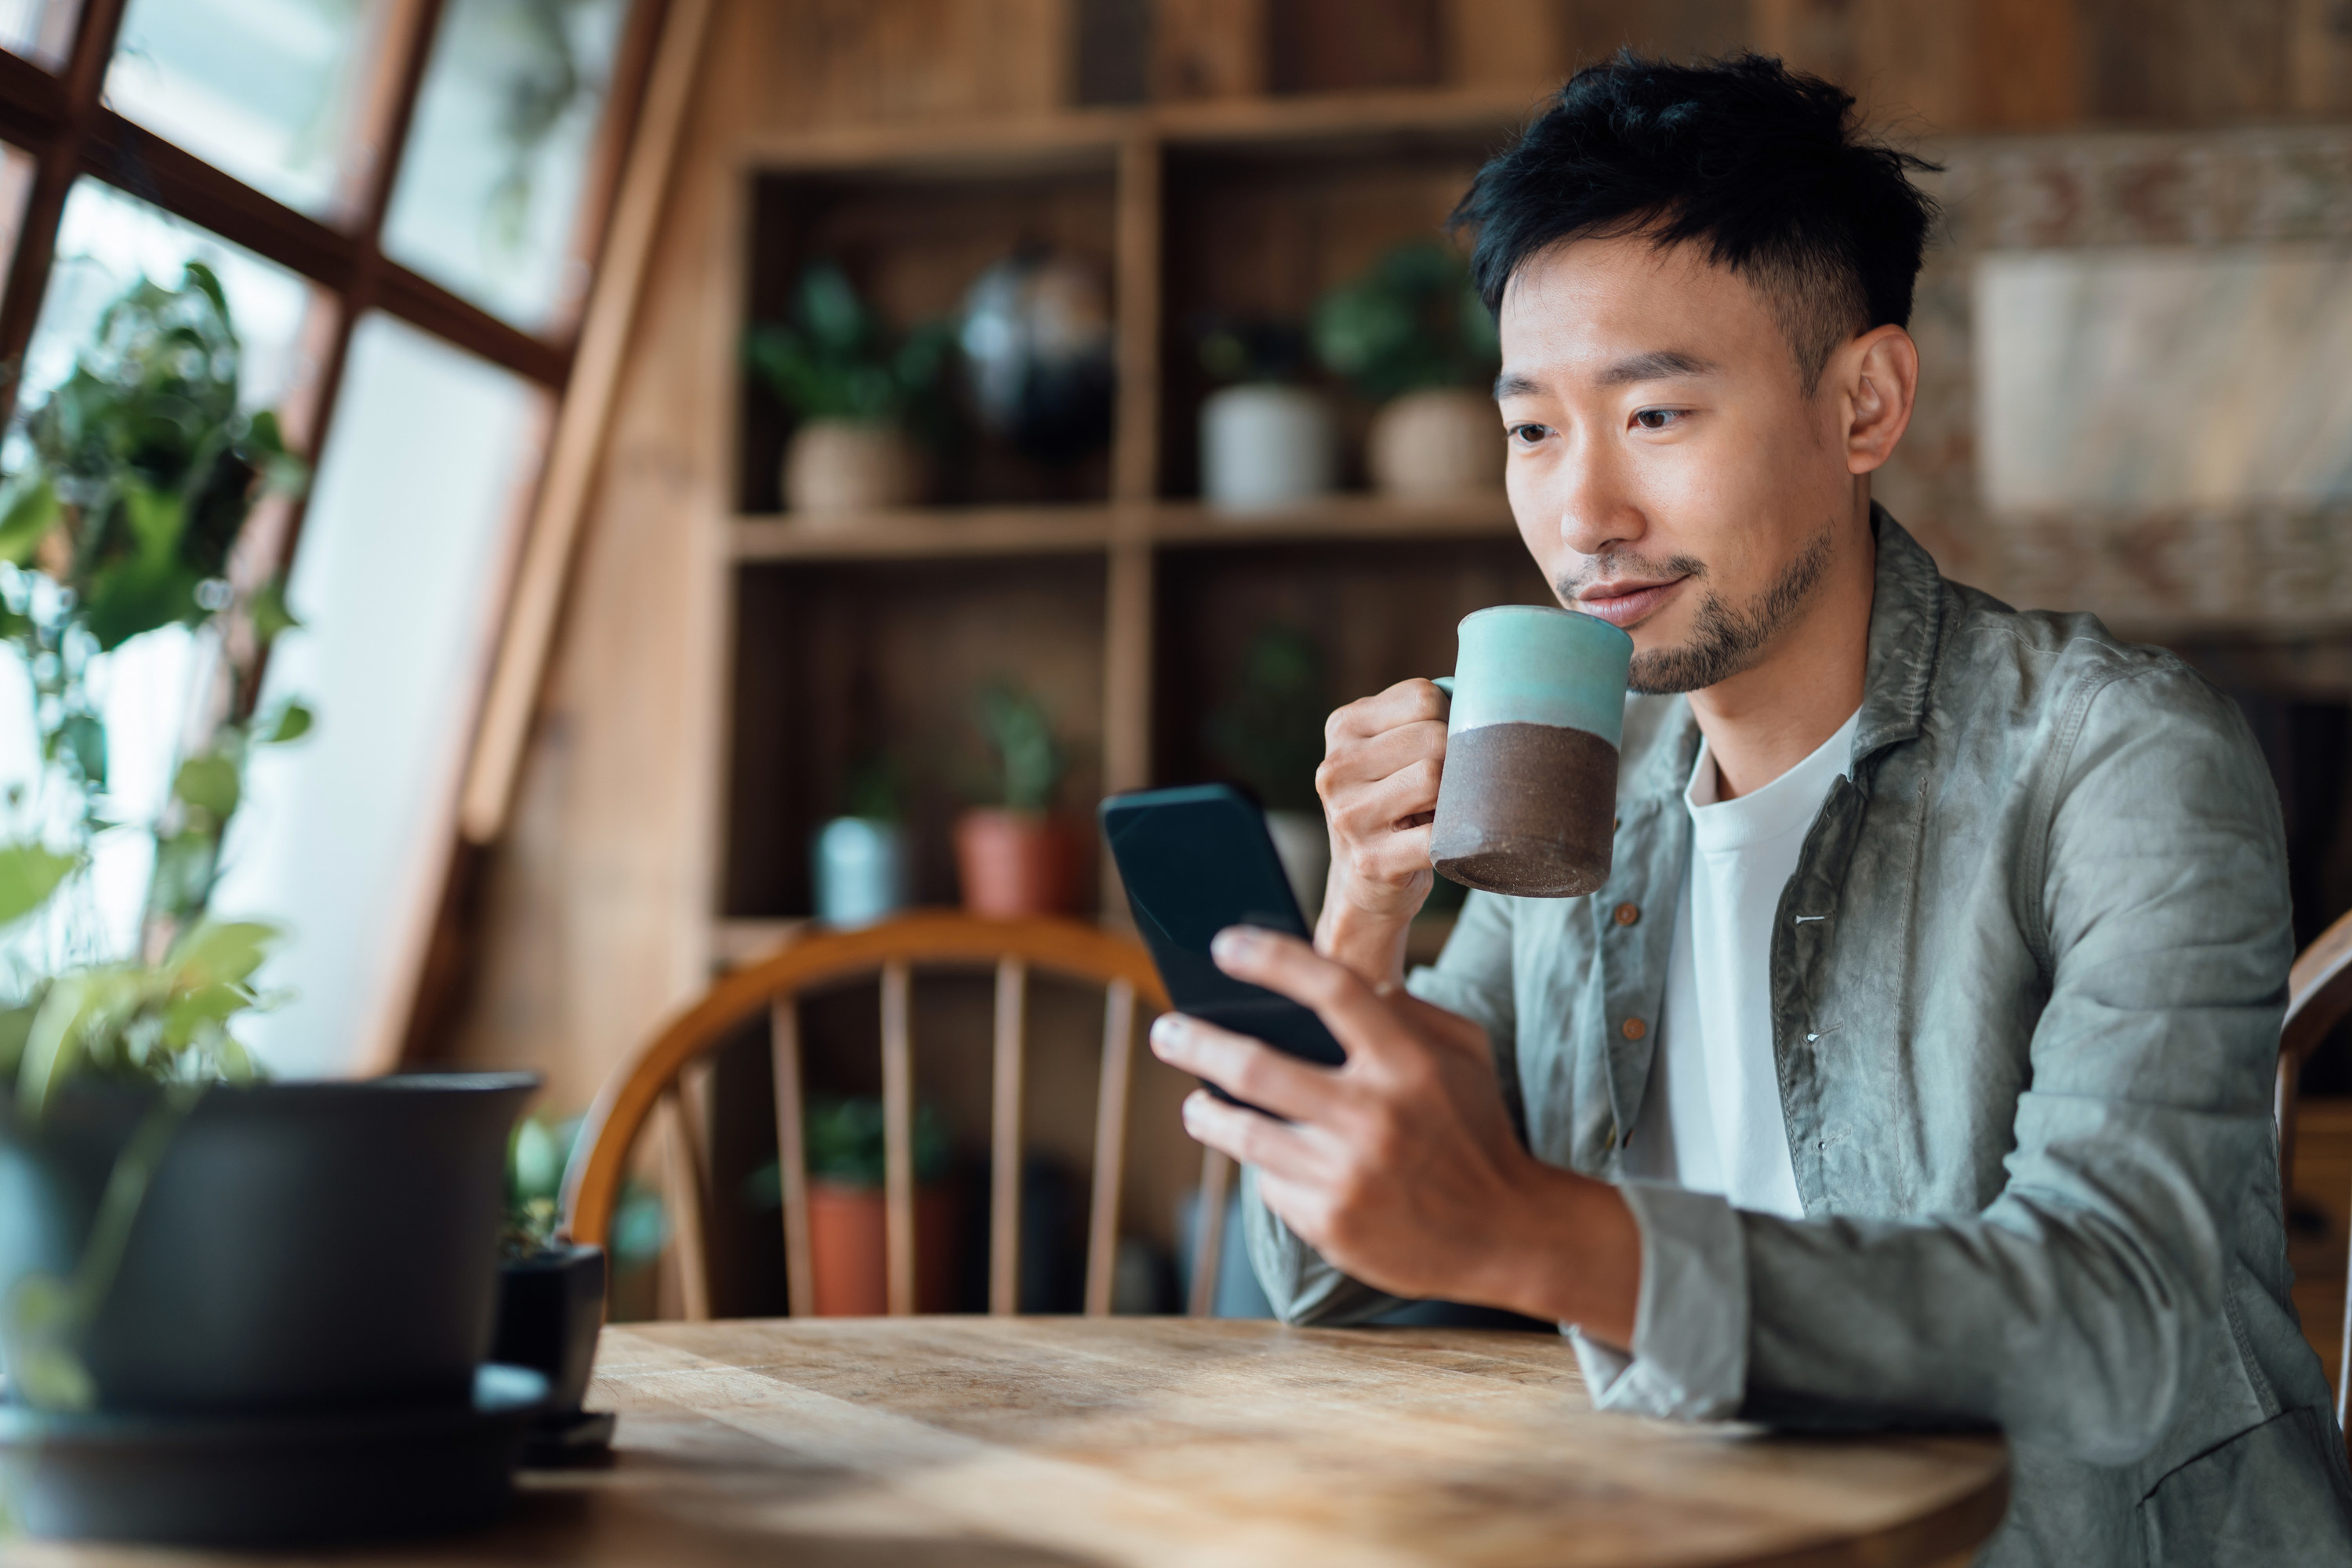 Man looking at his phone while drinking coffee